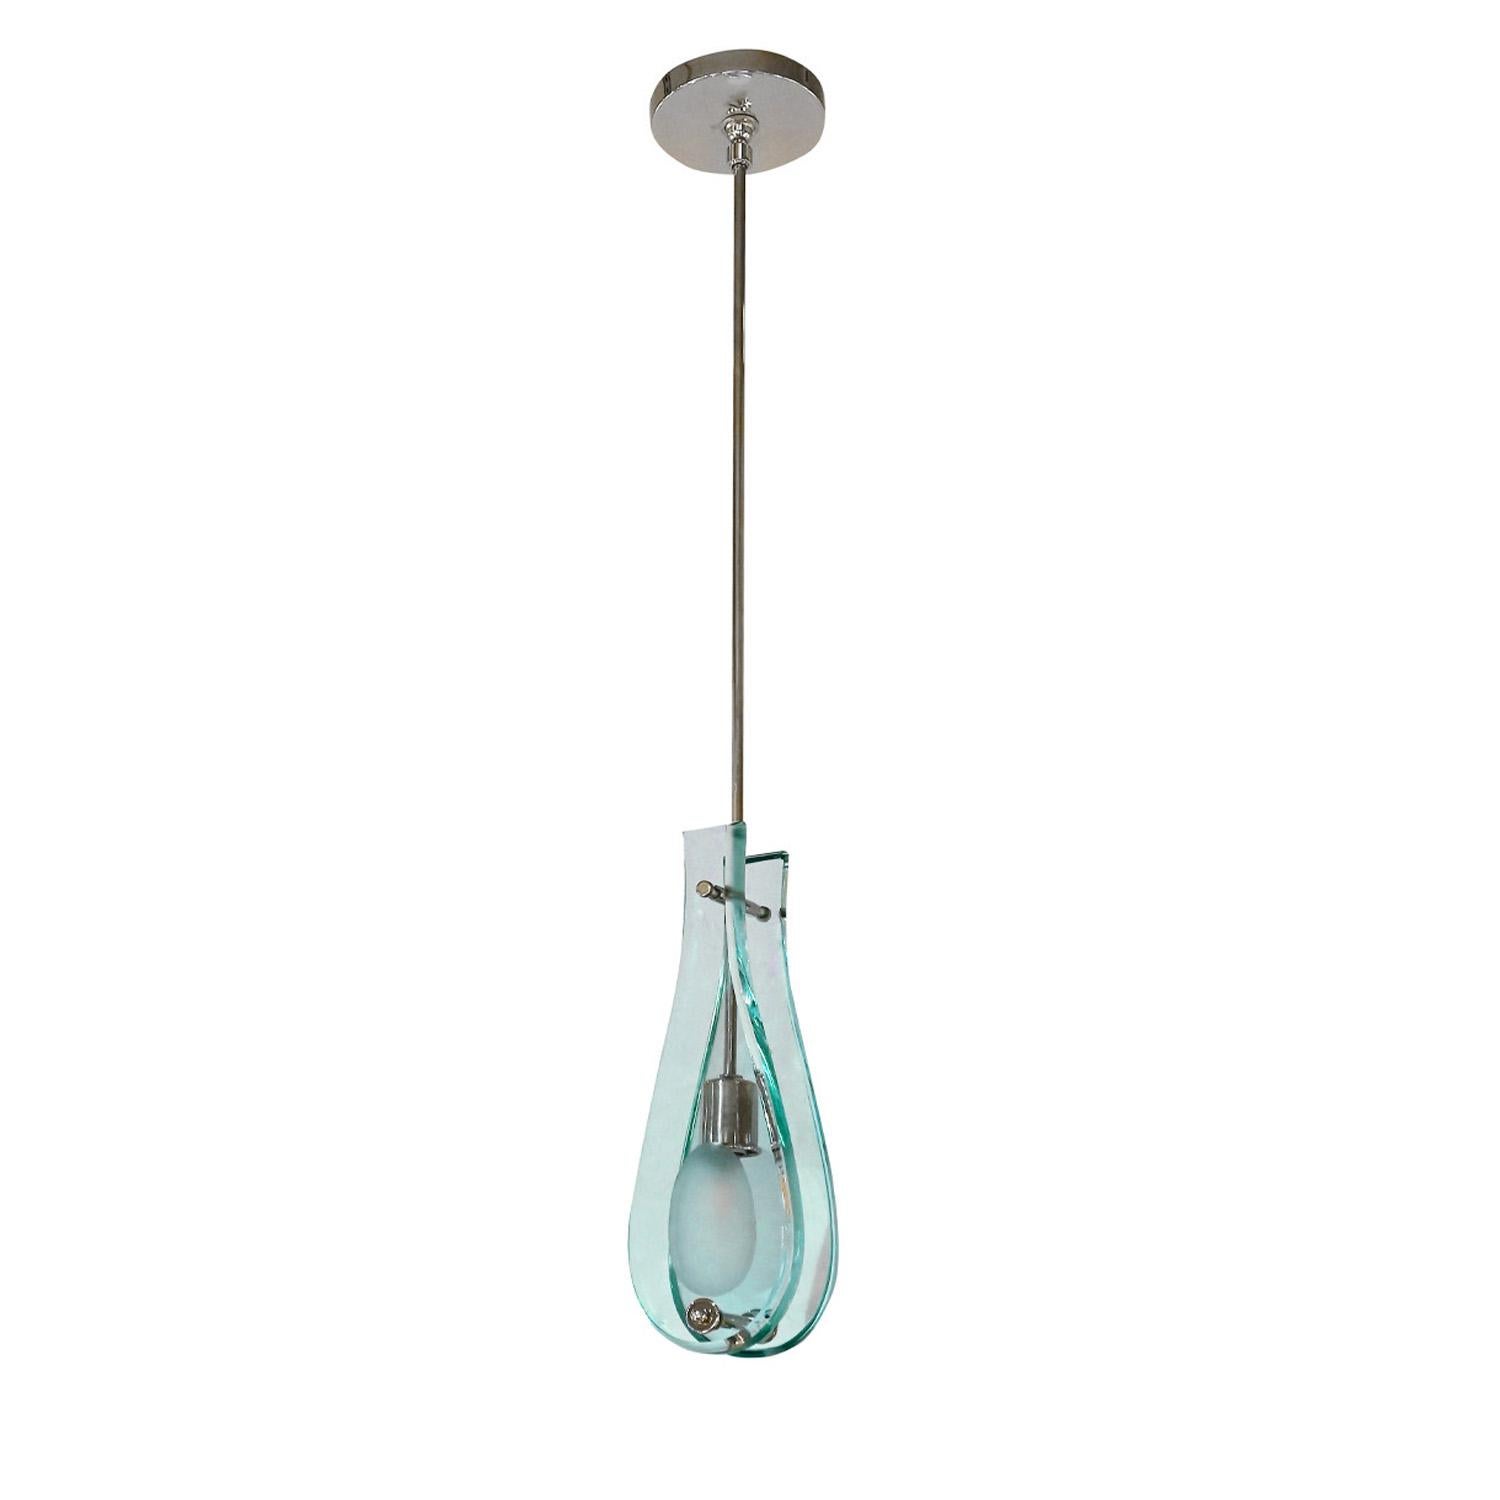 Pendant light with bilateral hand-cut glass facades and chrome hardware in the manner of Fontana Arte, Milan Italy, 1950's. Newly rewired by Lobel Modern - it now has an American candelabra socket (originally had European sockets). A timeless